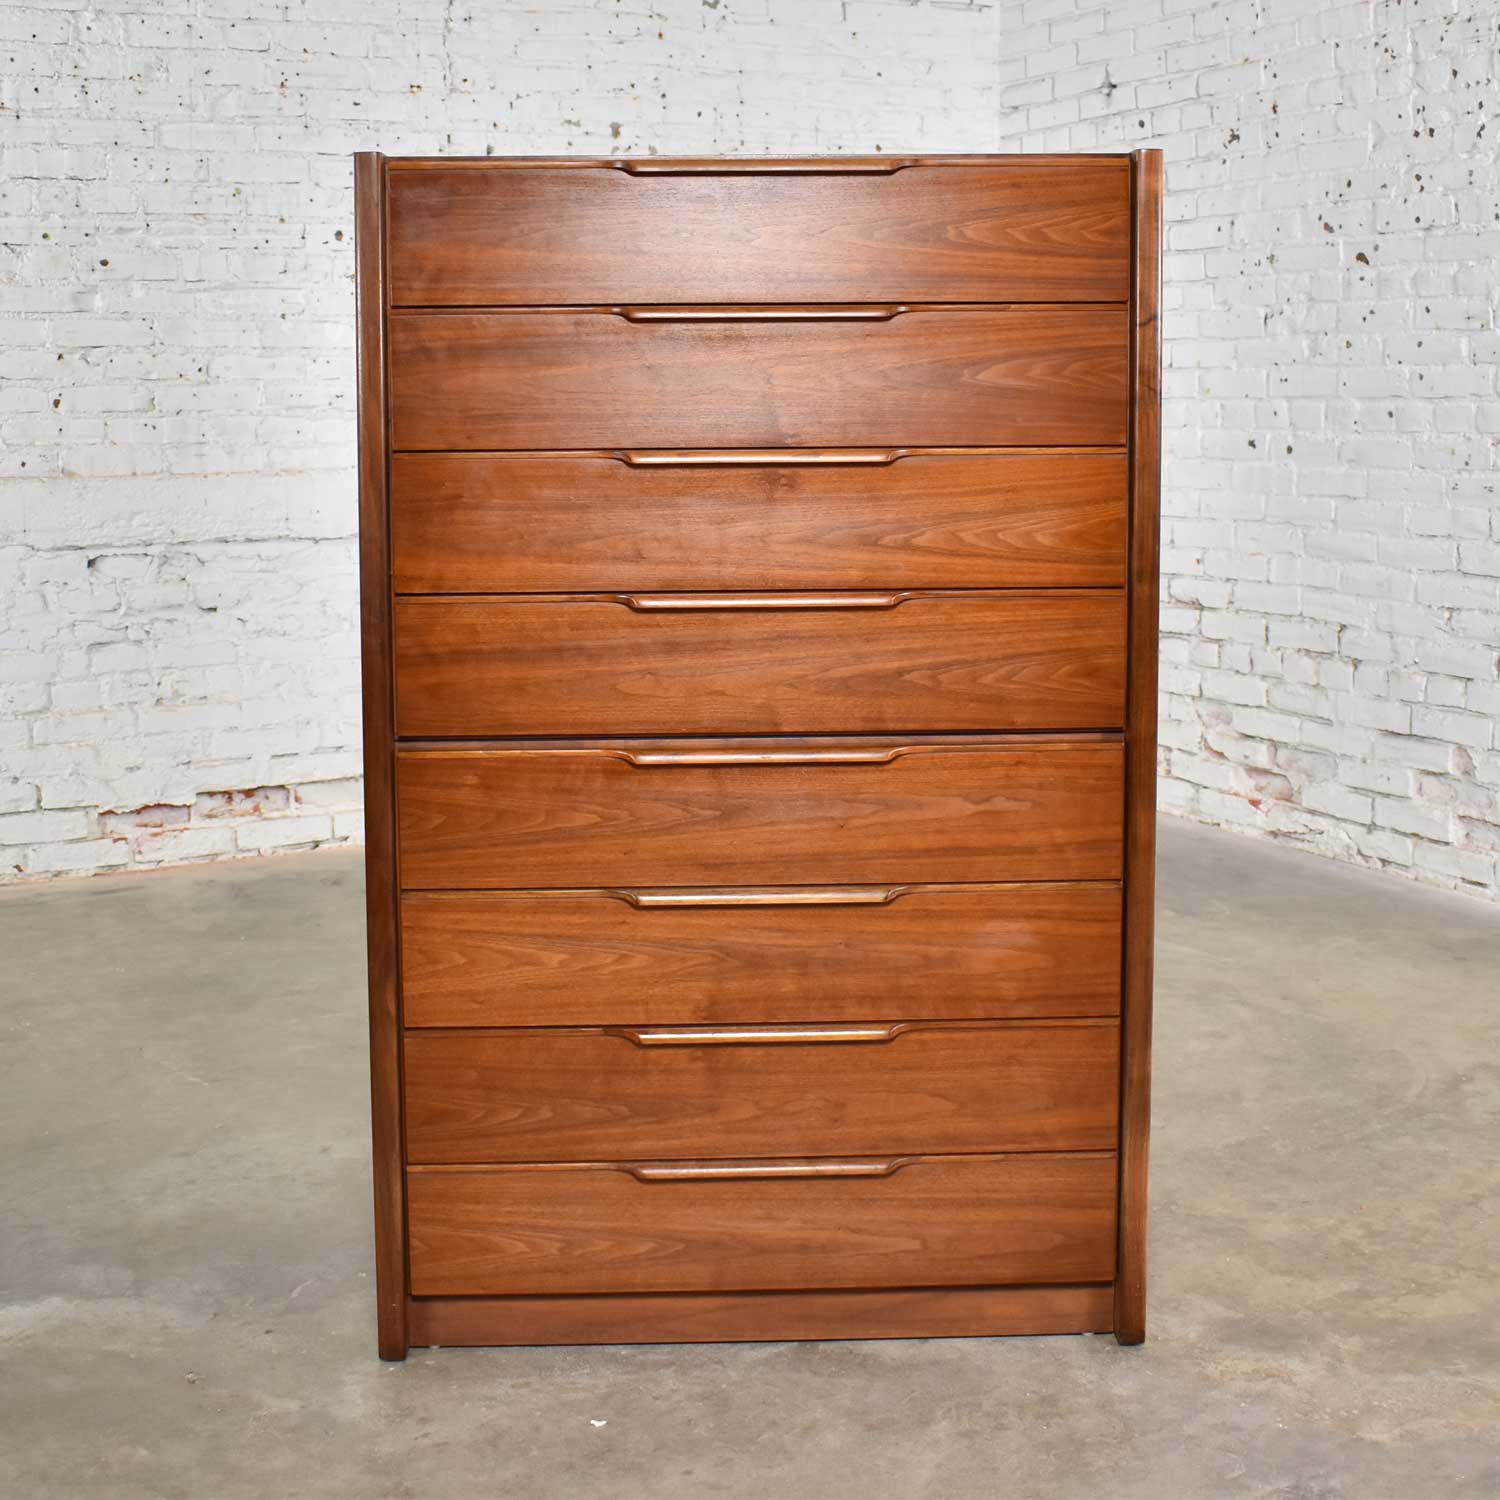 Walnut Scandinavian Modern Style Tall Chest of Drawers by Barzilay Furniture Mfg.